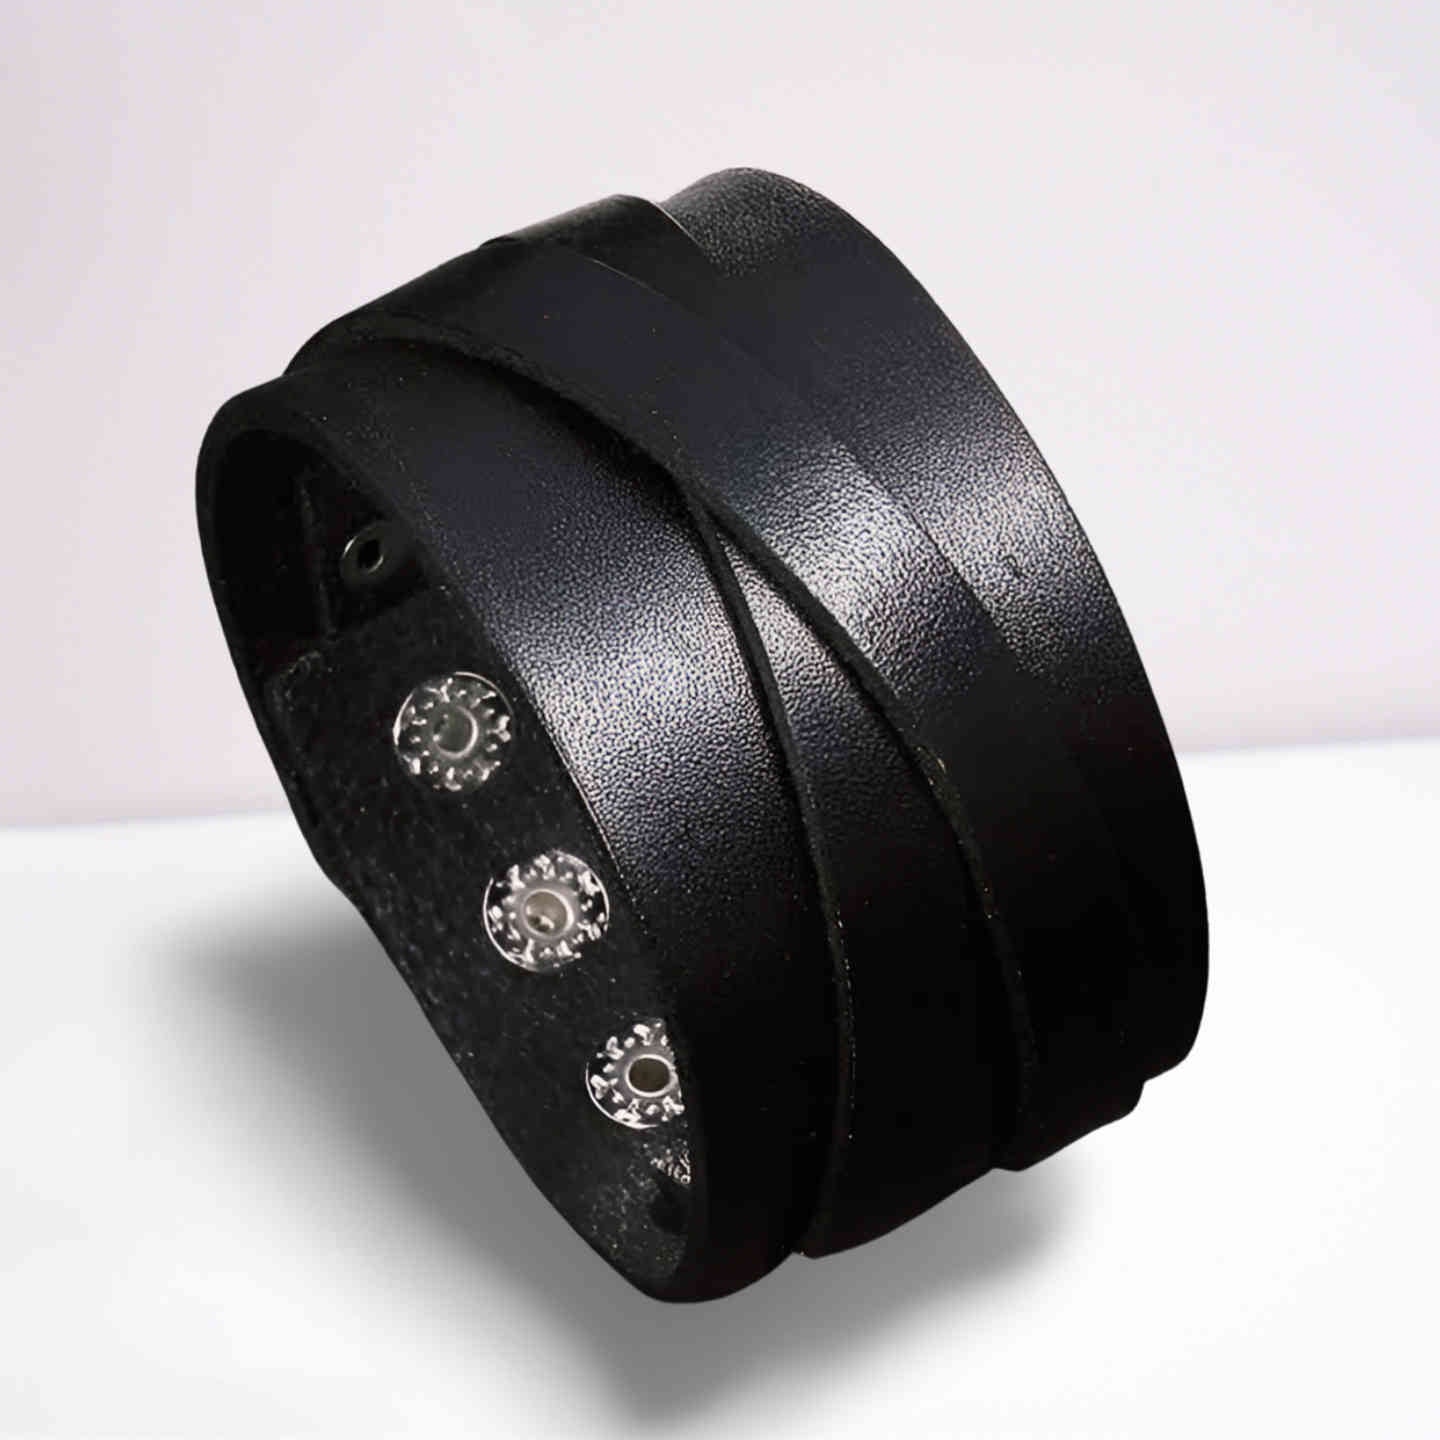 Buy Men's Wide Black Cuff Wristband Leather Bracelet at Amazon.in